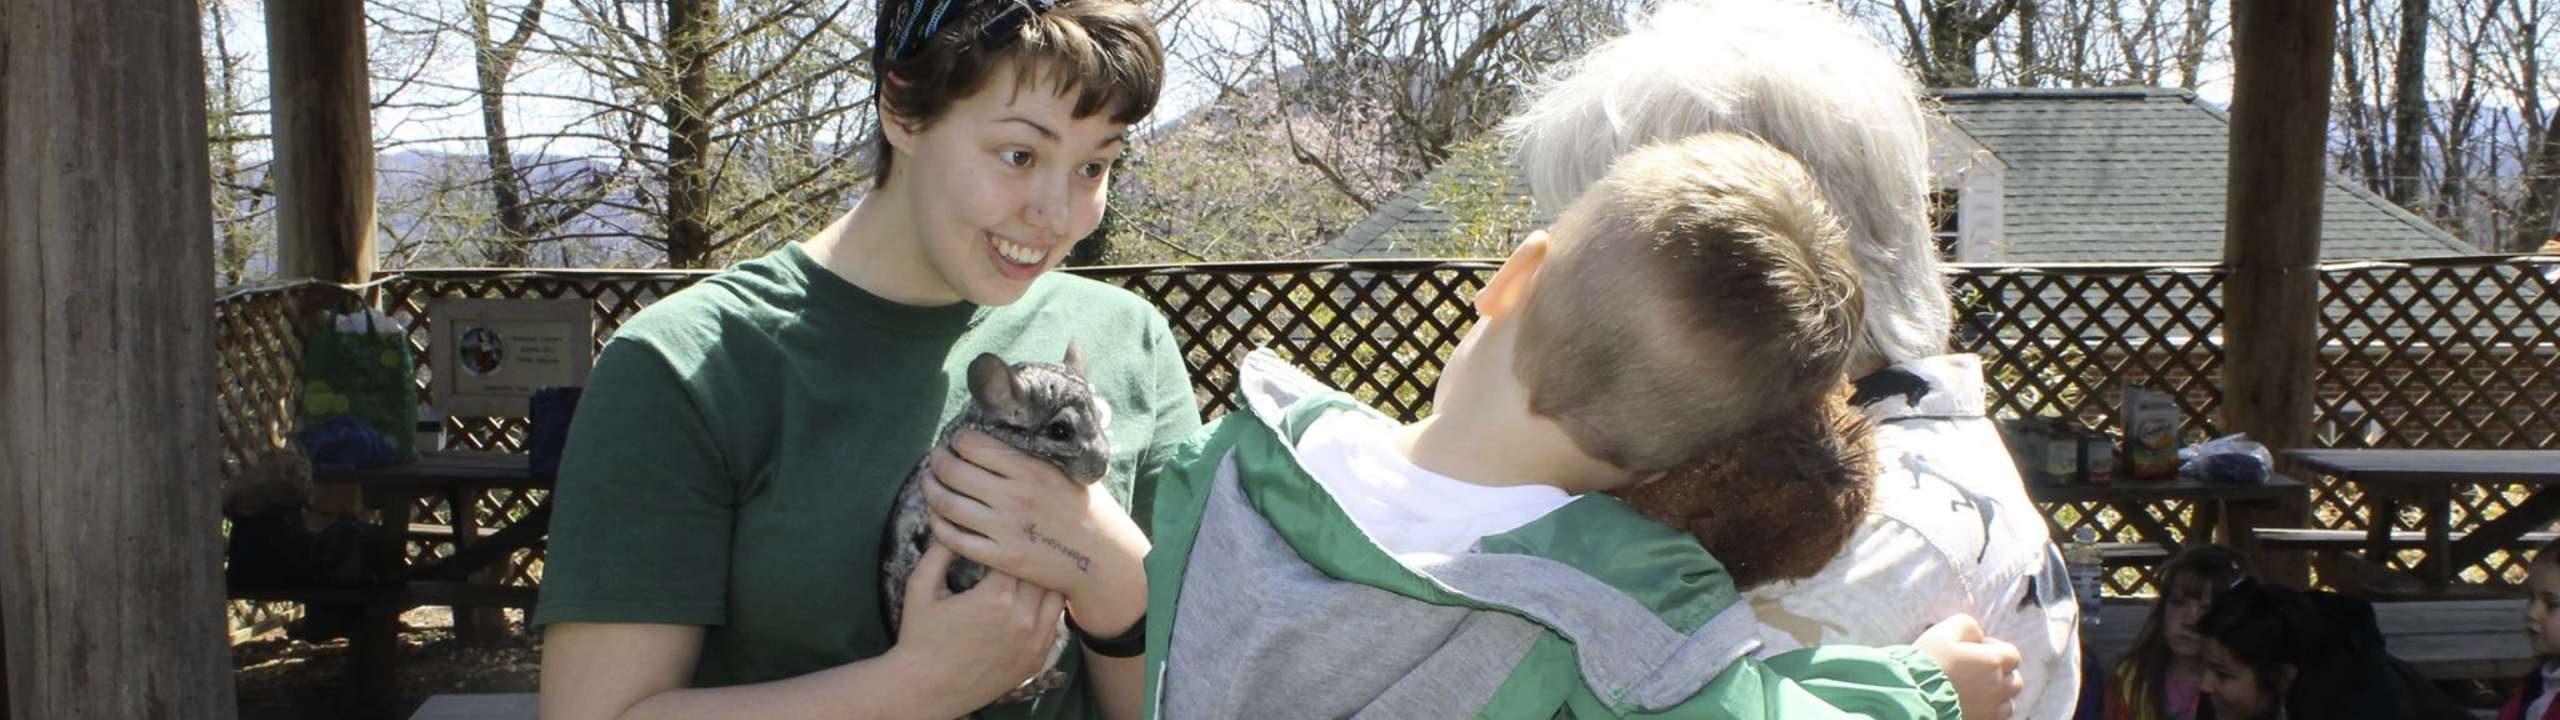 Visitors talk with a staff member at the Mill Mountain Zoo